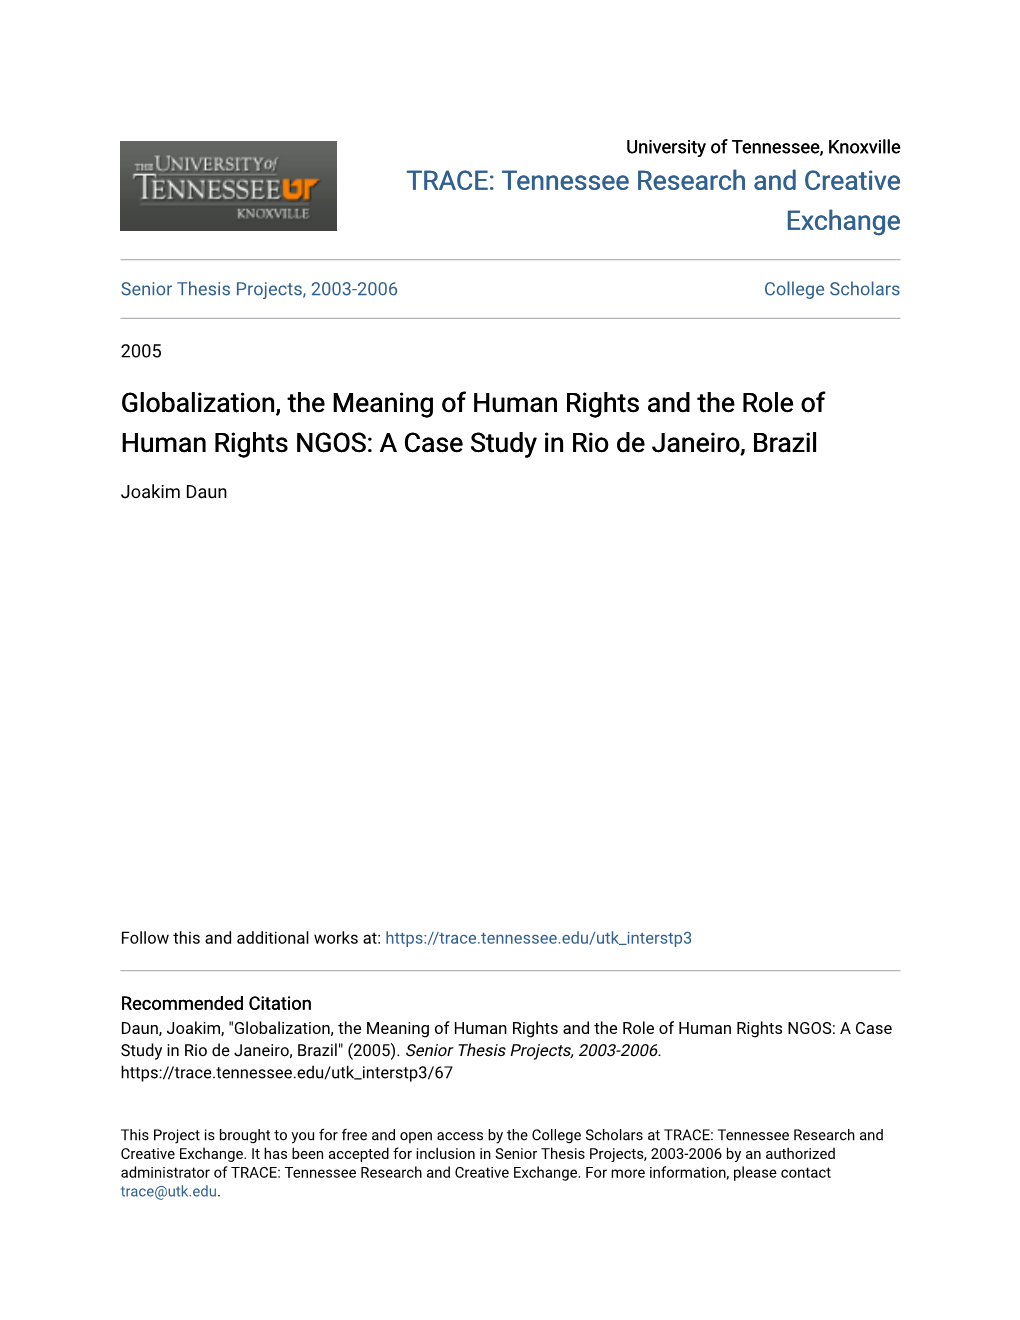 Globalization, the Meaning of Human Rights and the Role of Human Rights NGOS: a Case Study in Rio De Janeiro, Brazil